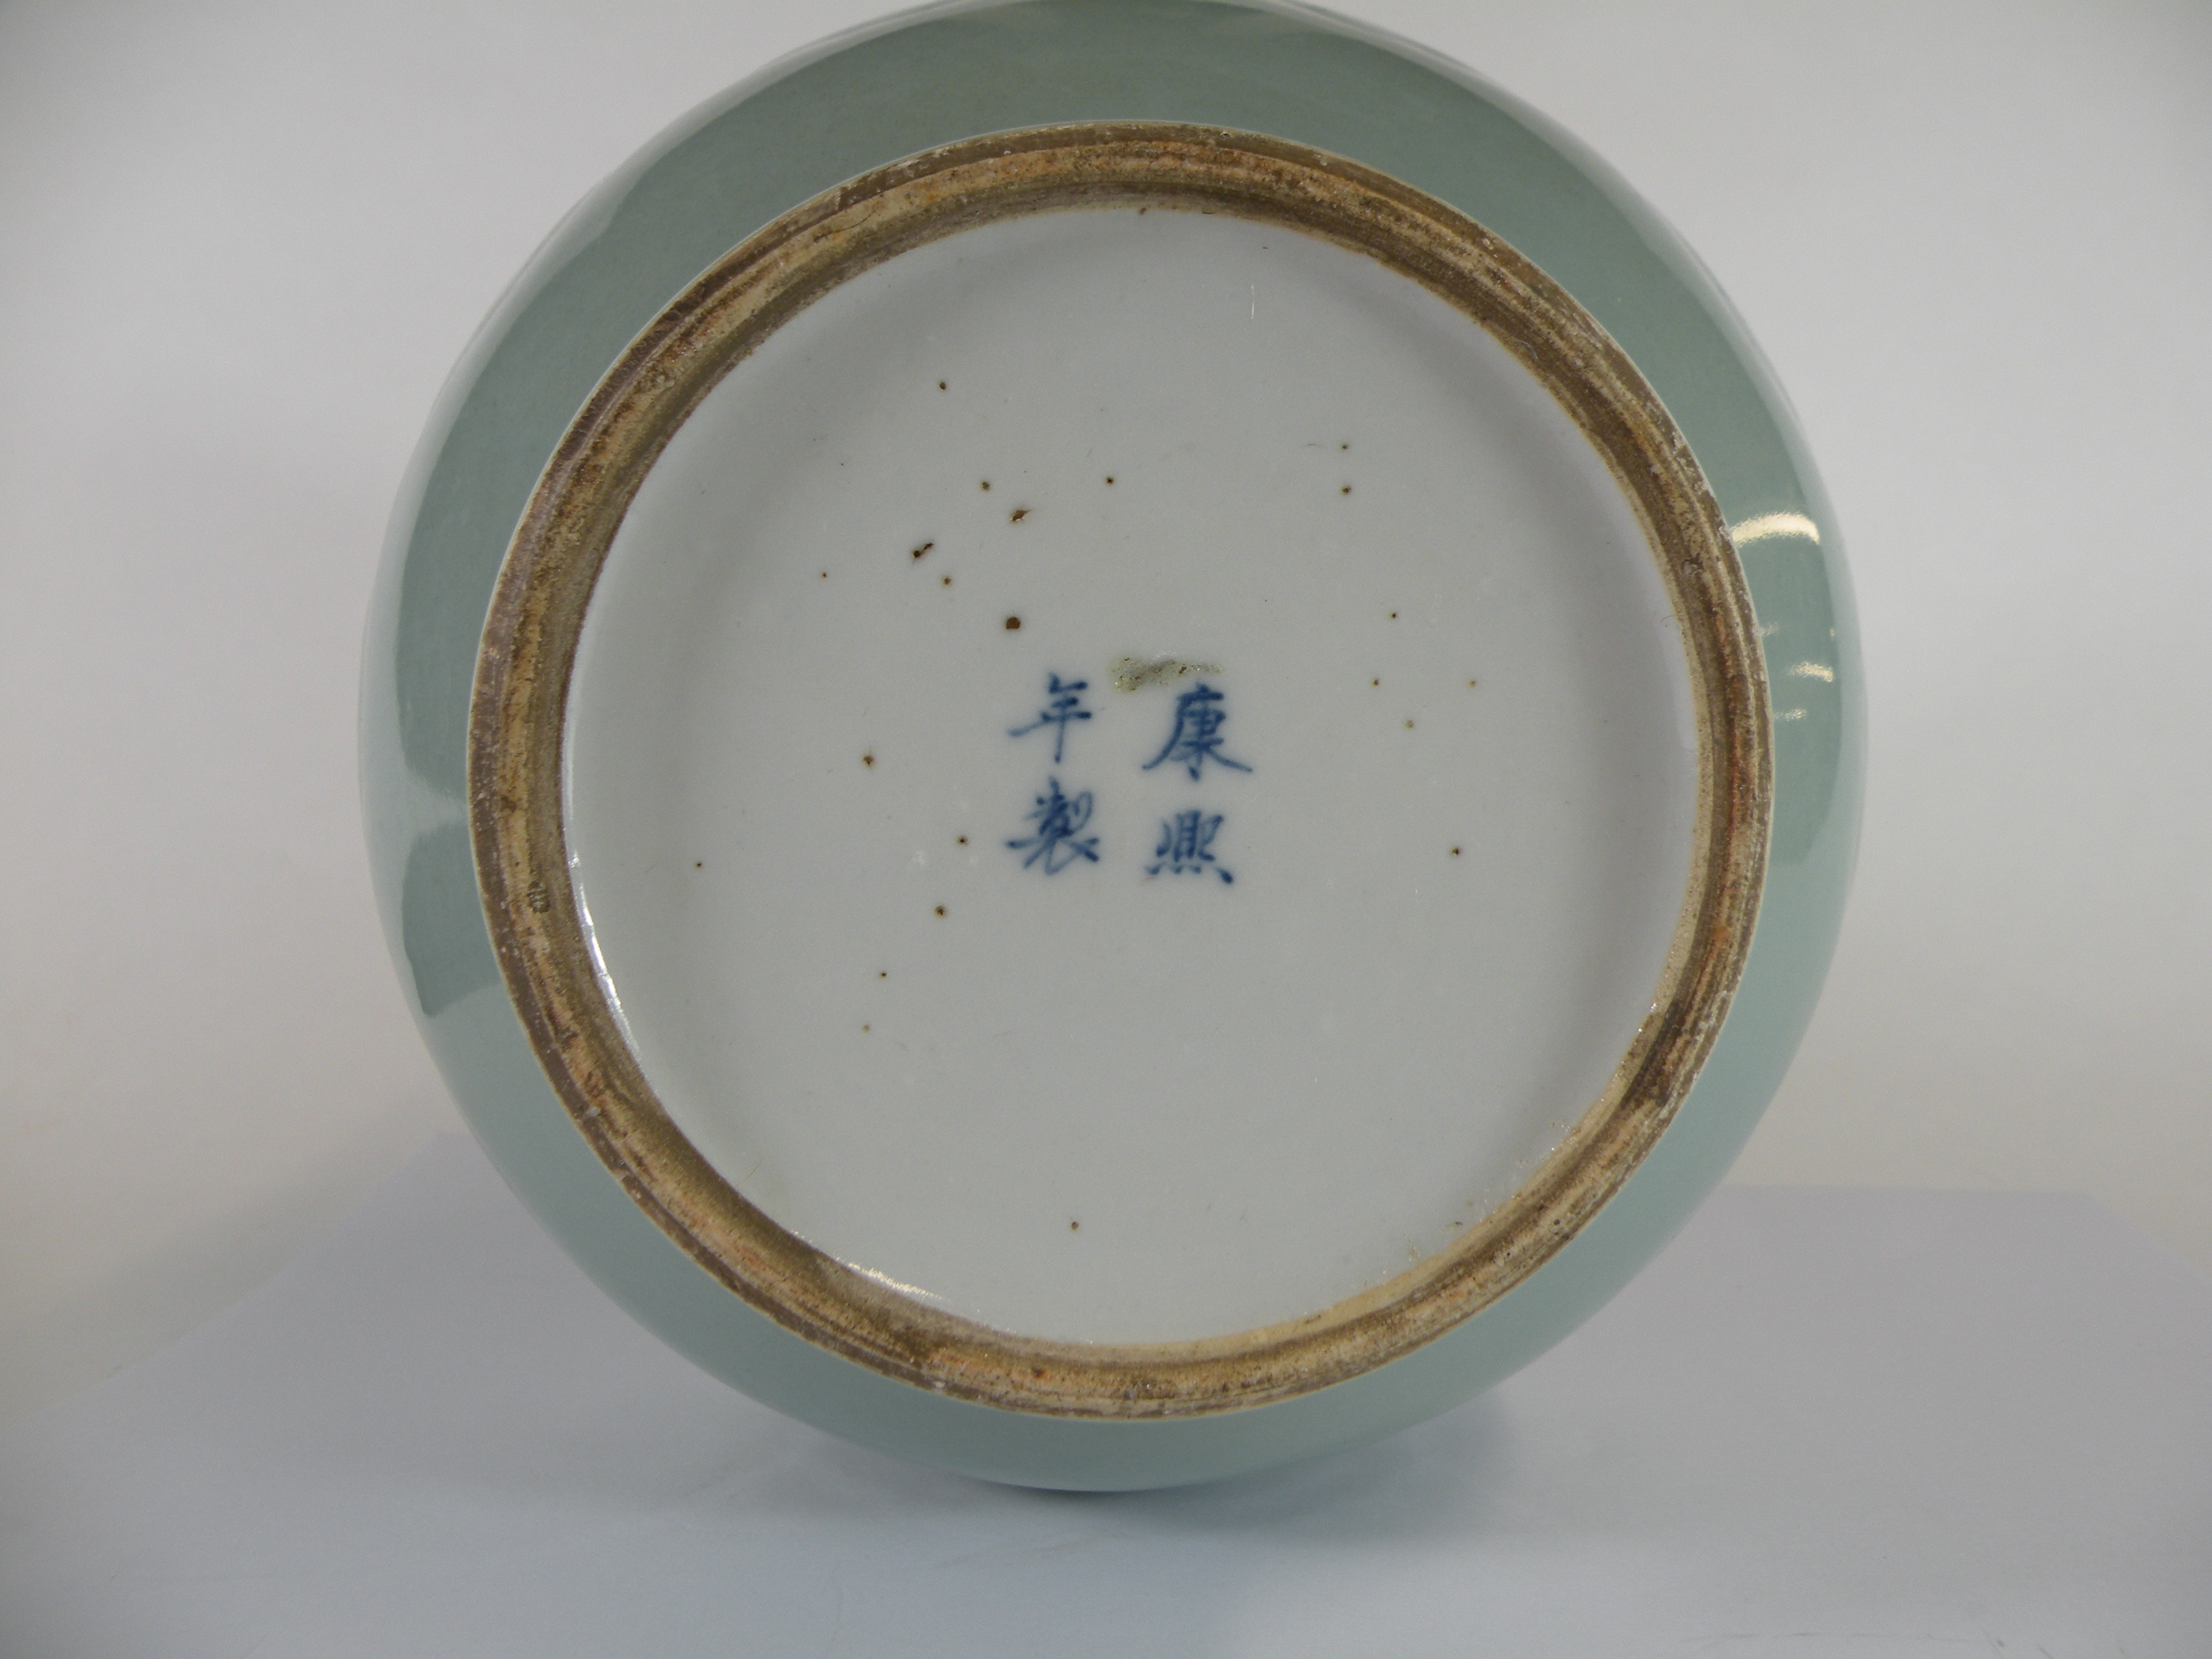 A fine quality Chinese celadon glazed and relief decorated porcelain vase with 4 character mark to - Image 5 of 6